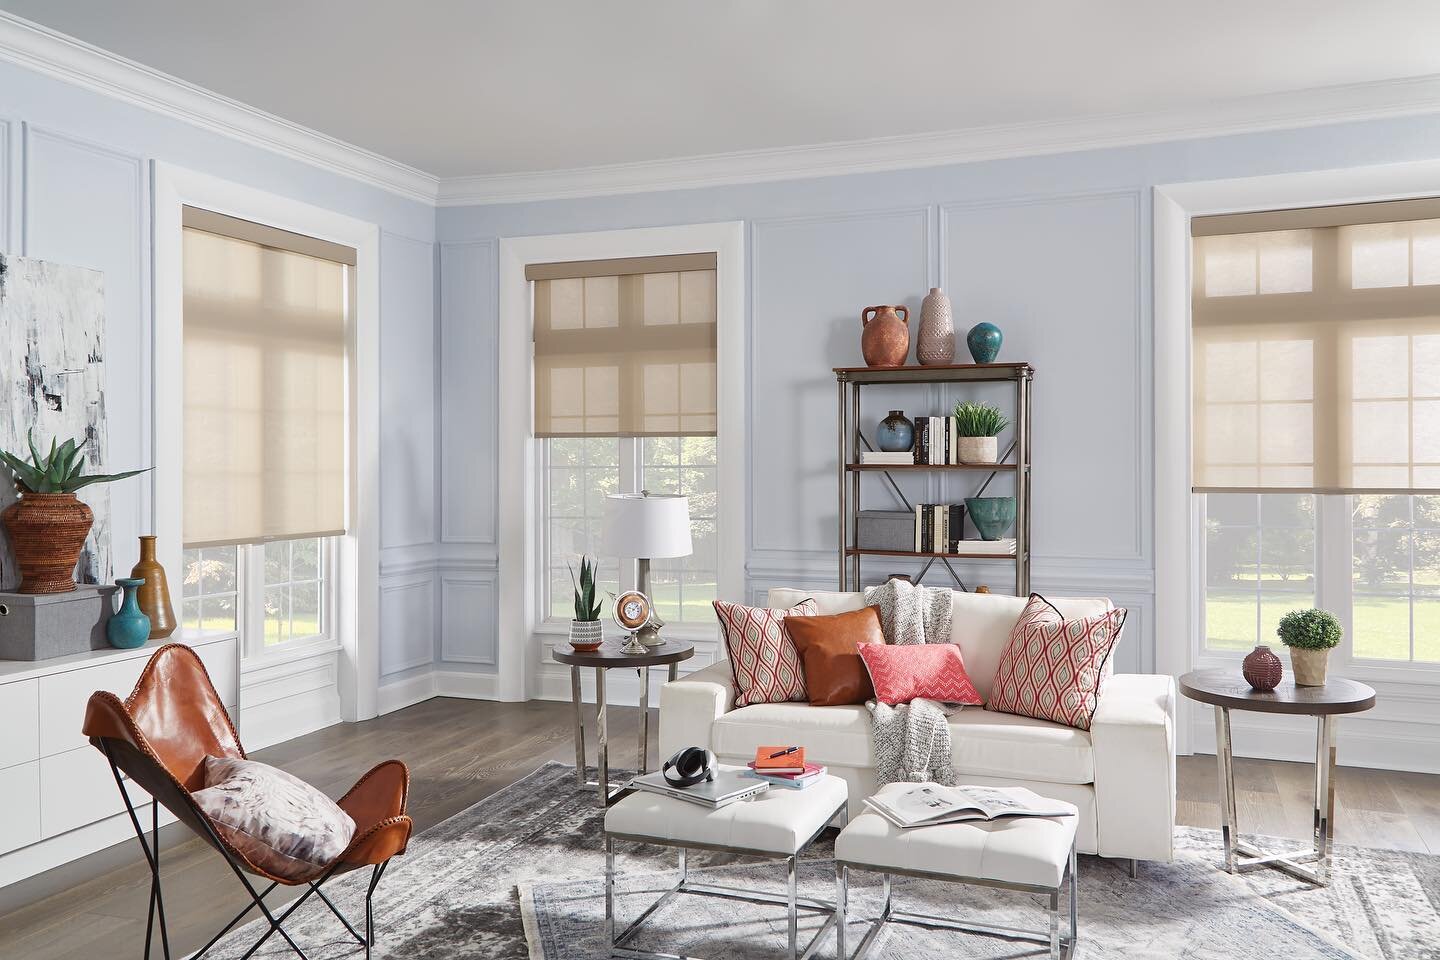 Rockwood Shutters is proud to announce our brand new partnership.

Bali Designer Collection is a specially curated collection of blinds &amp; shades, built to enhance our shutter offering. It features a stunning selection of fabrics and materials, on